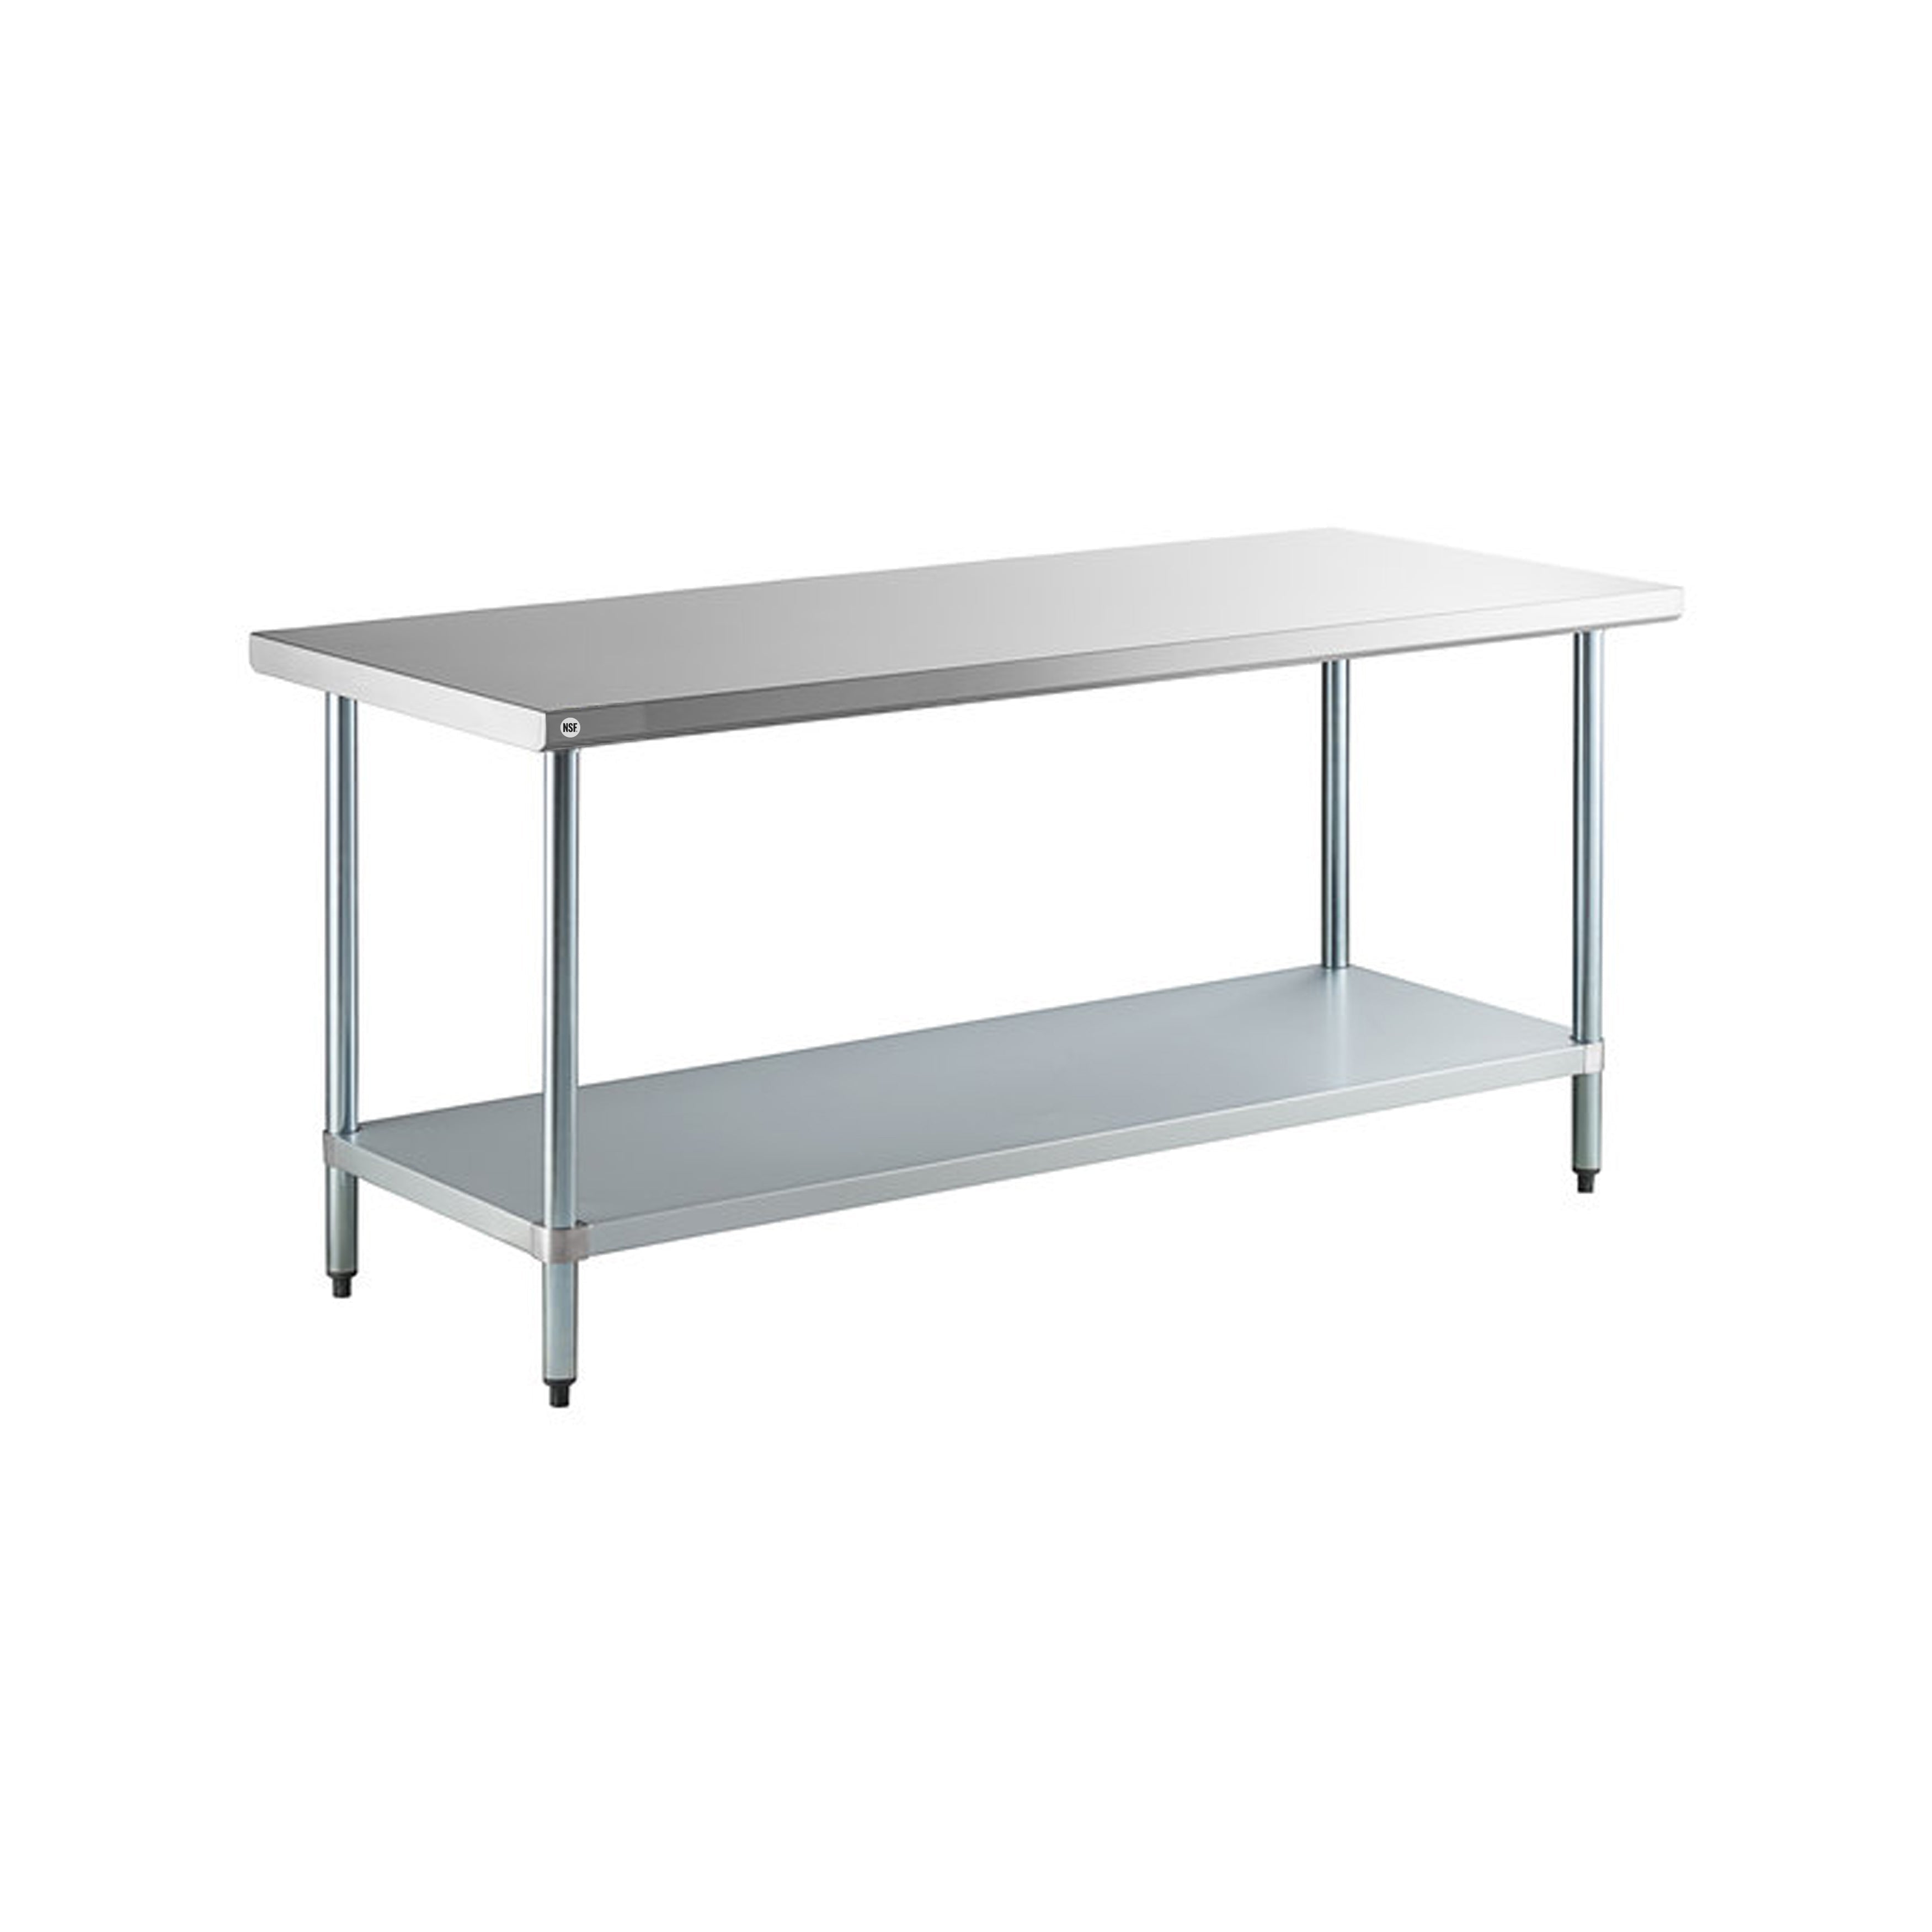 Omcan - 17581, Commercial 60" x 24" Stainless Steel Kitchen Work Table 1100lbs Medium Duty